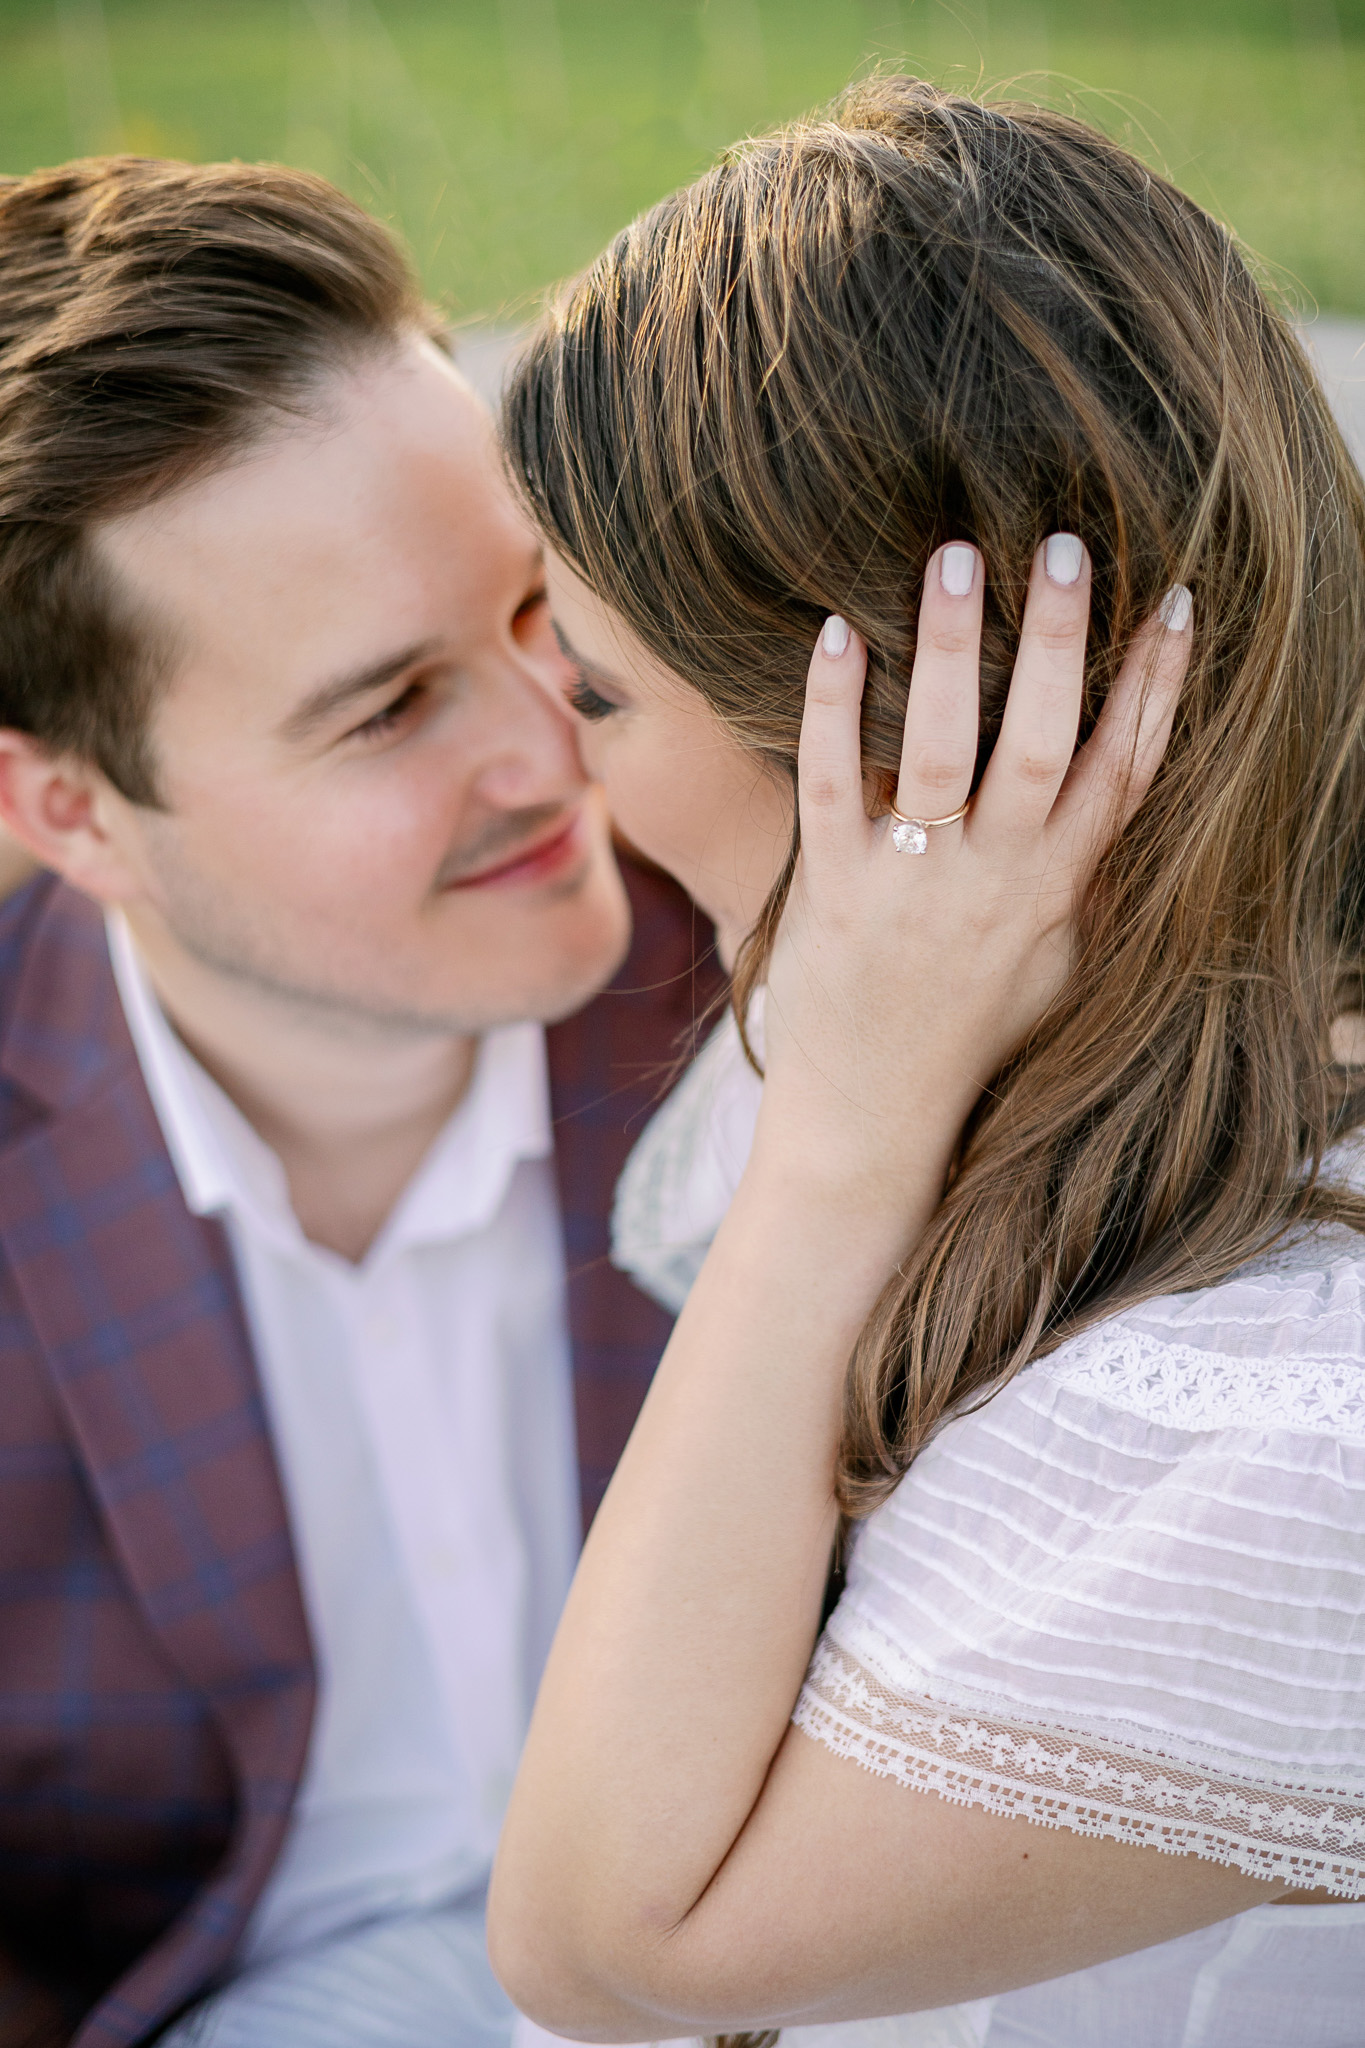 Mid-City New Orleans Engagement Session